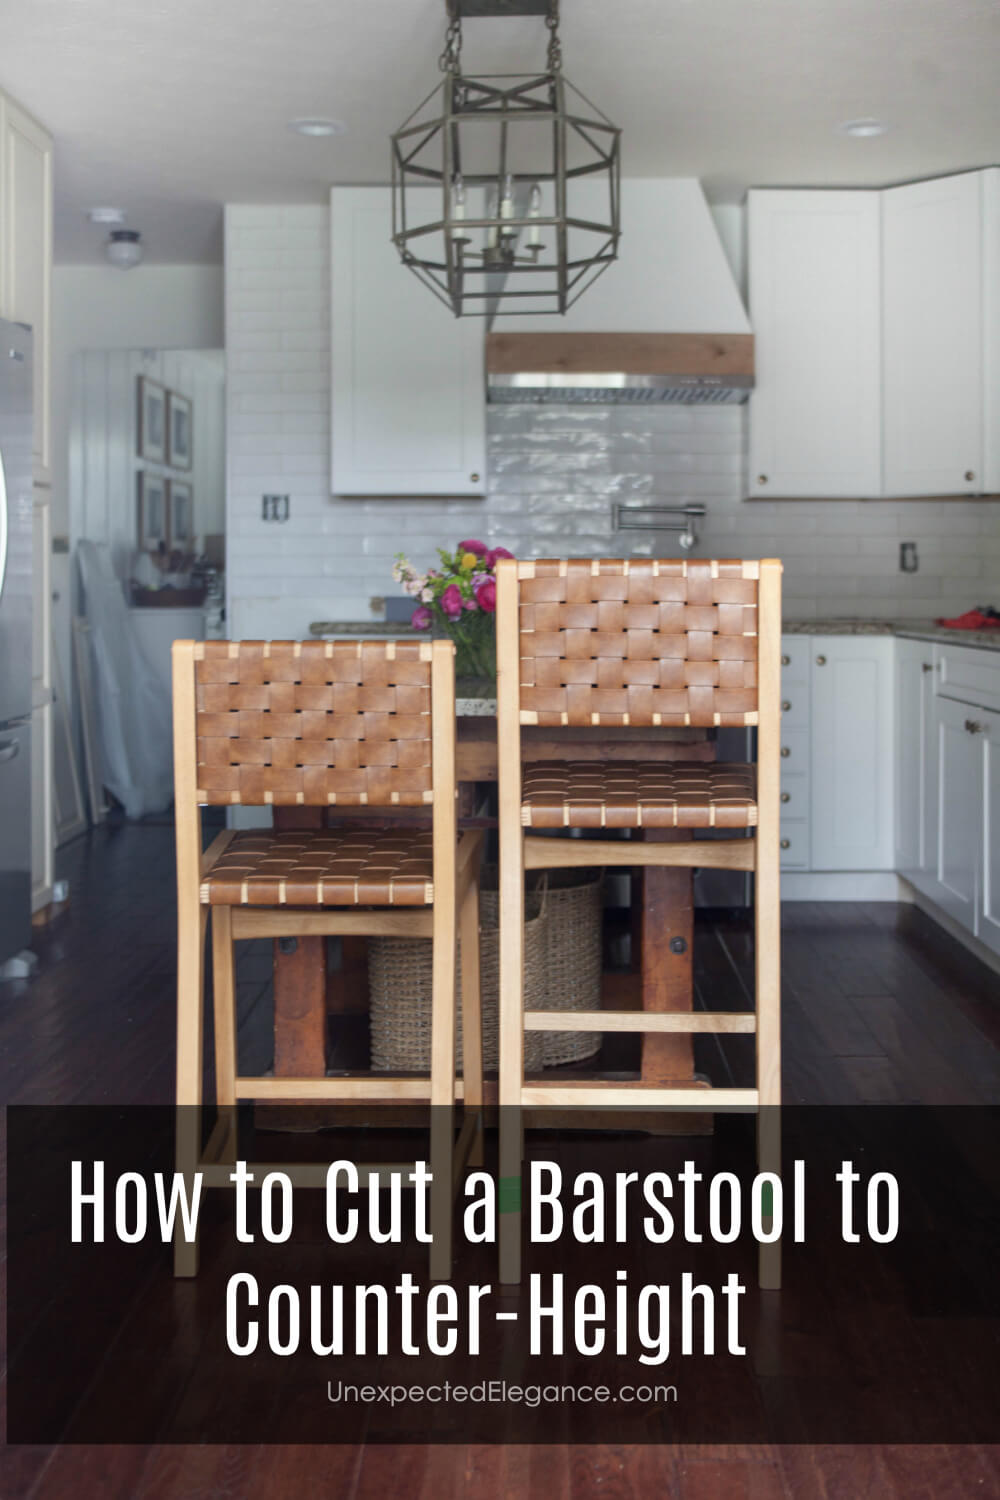 How To Cut A Barstool Counter Height, How To Trim Bar Stool Legs